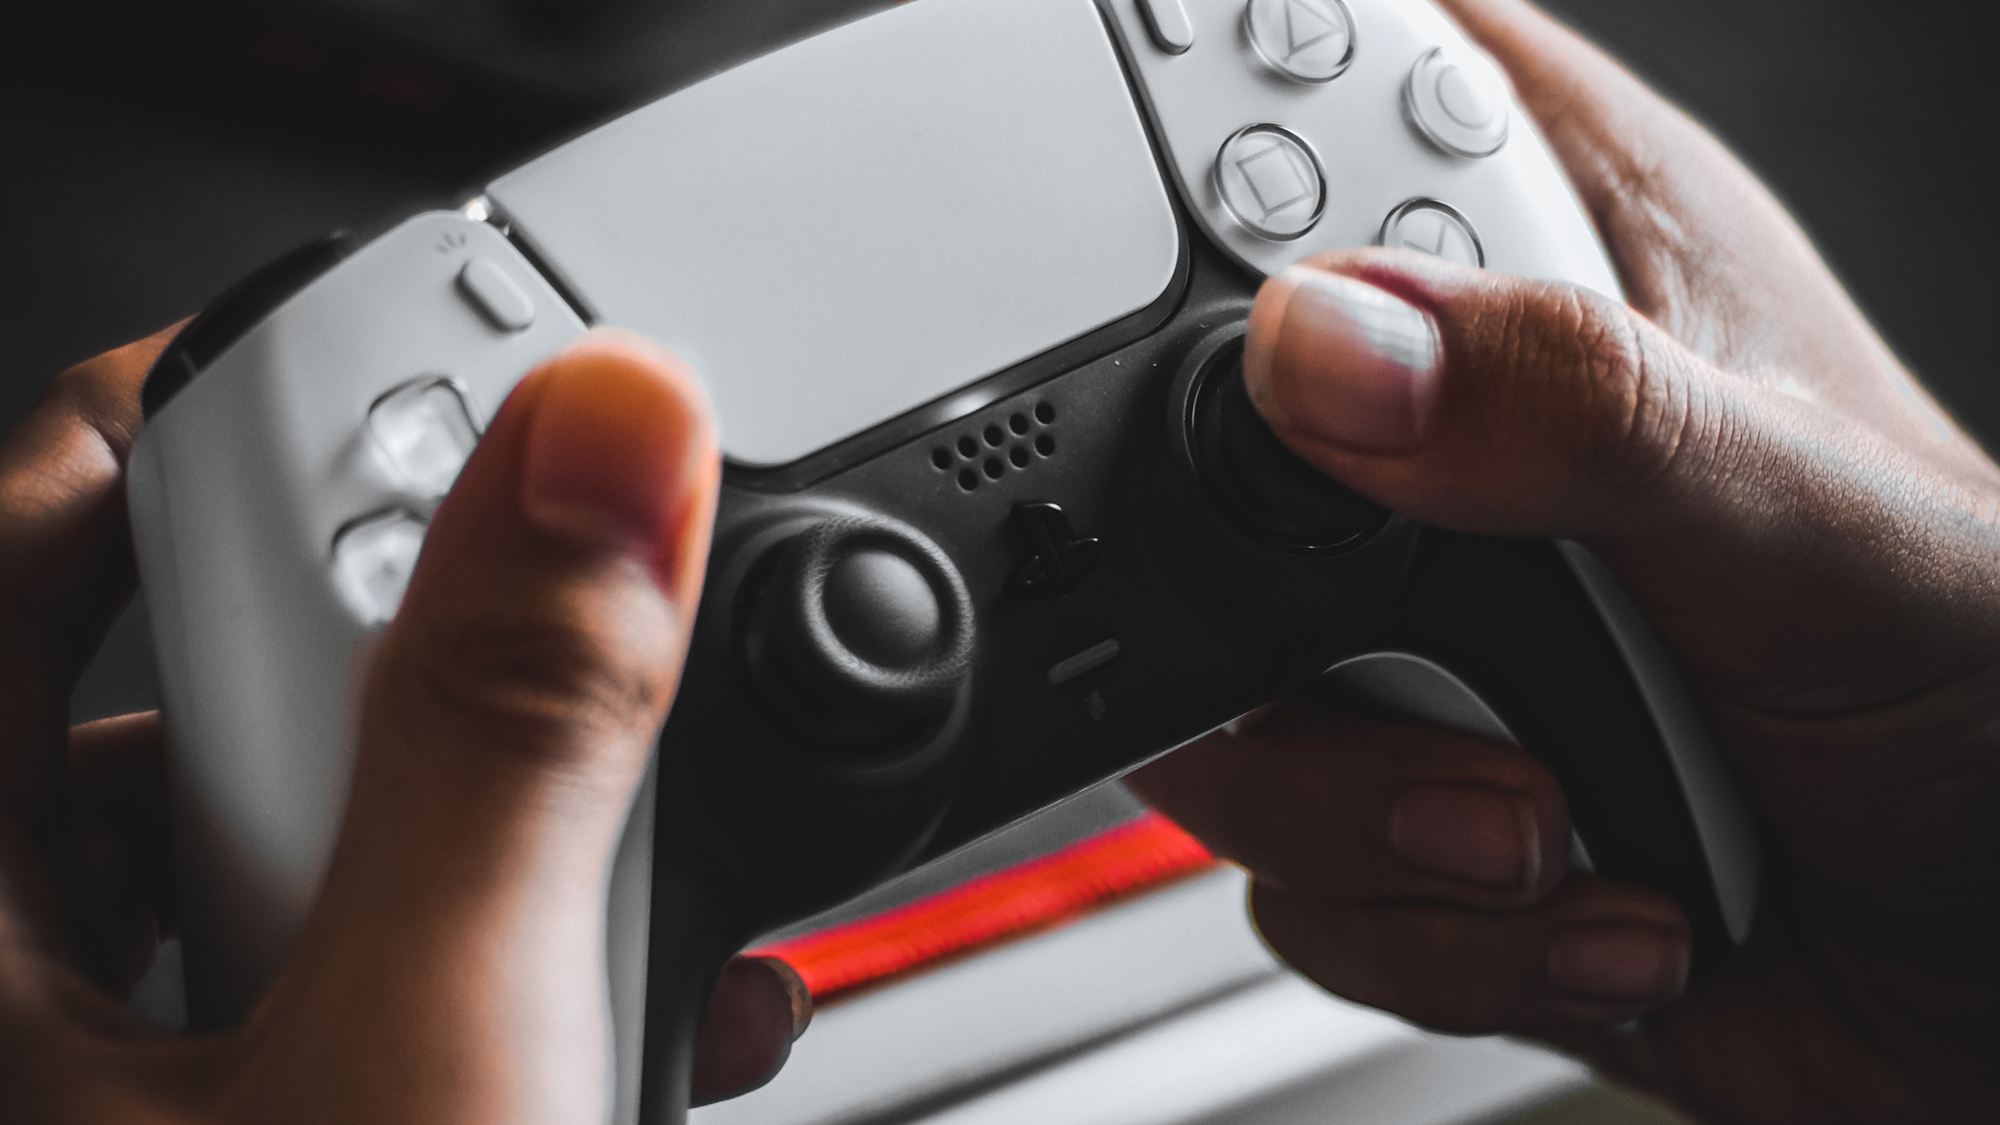 Close up to hands holding a Playstation 5 controller